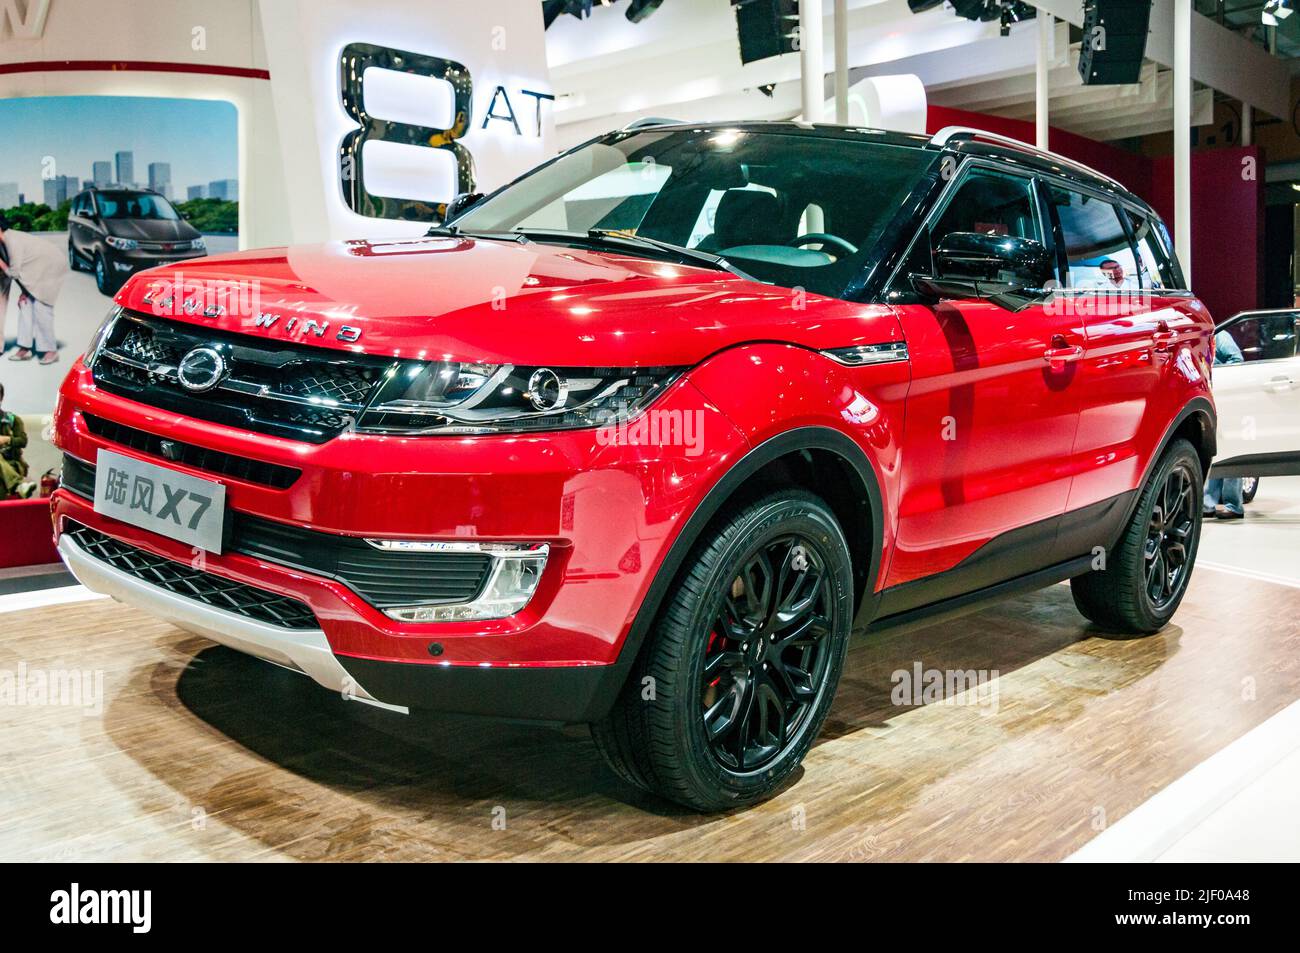 The Landwind X7 a copy of the Range Rover Evoque on display at the 2014 Guangzhou Auto Show. Stock Photo